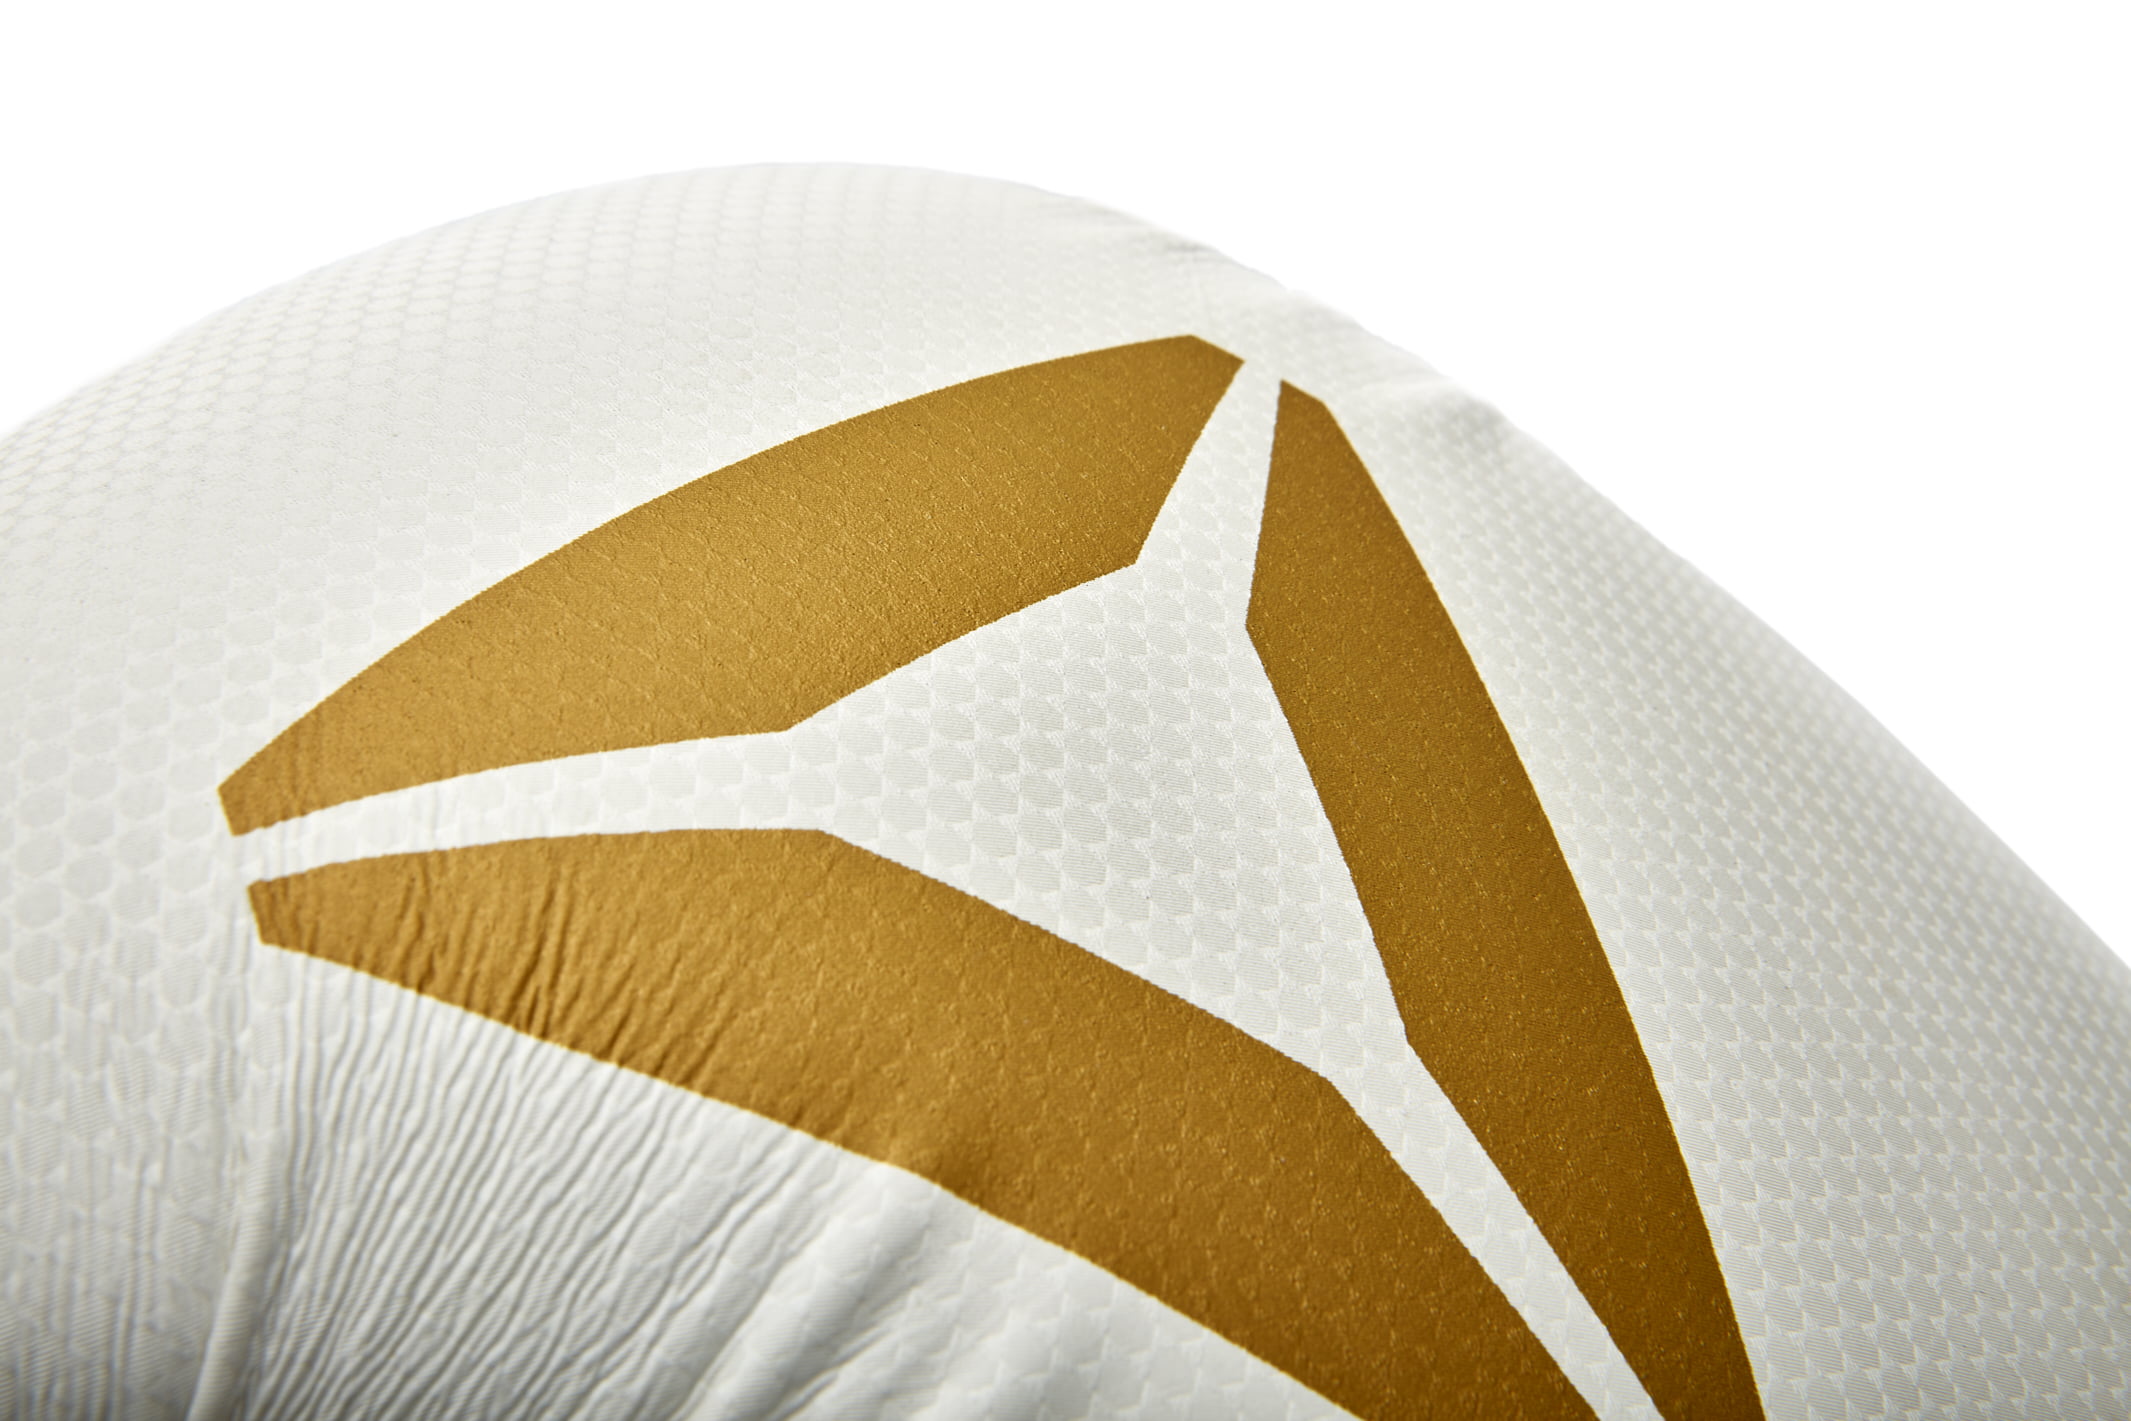 white and gold reebok boxing gloves